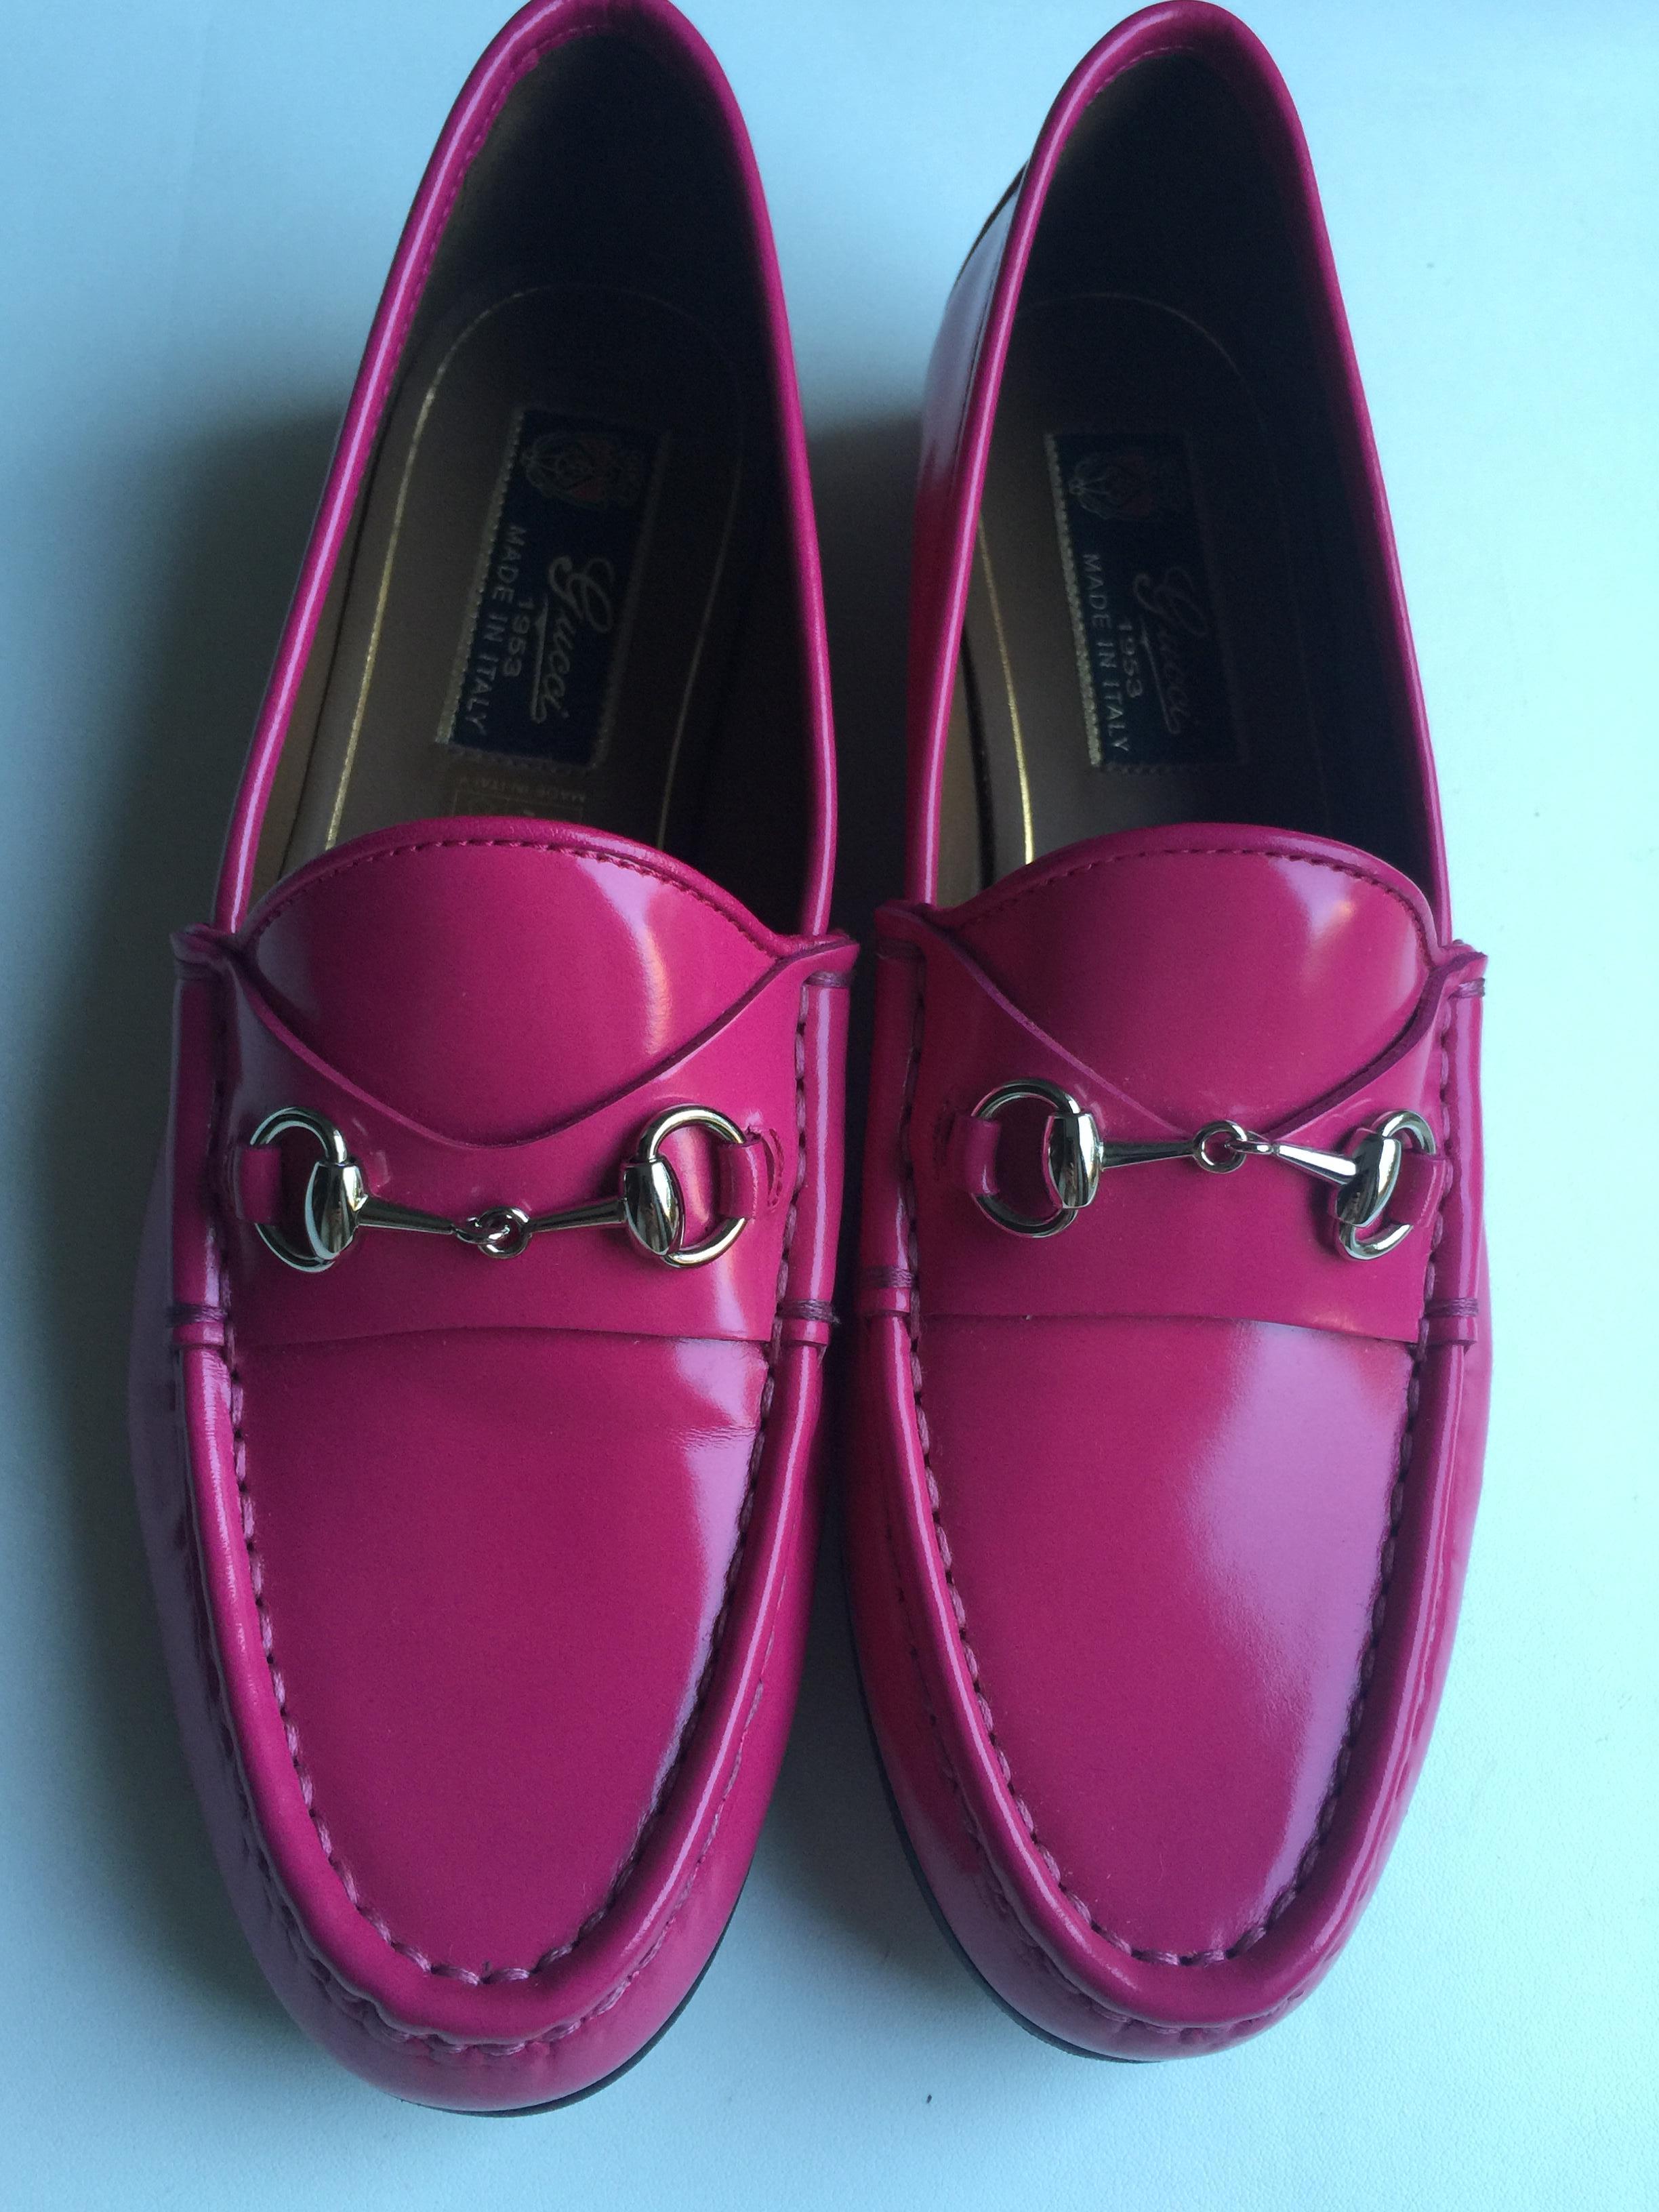 Magenta ;eather Gucci loafers with silver tone horsebit embellishments at vamps and stacked heels
Dustbag